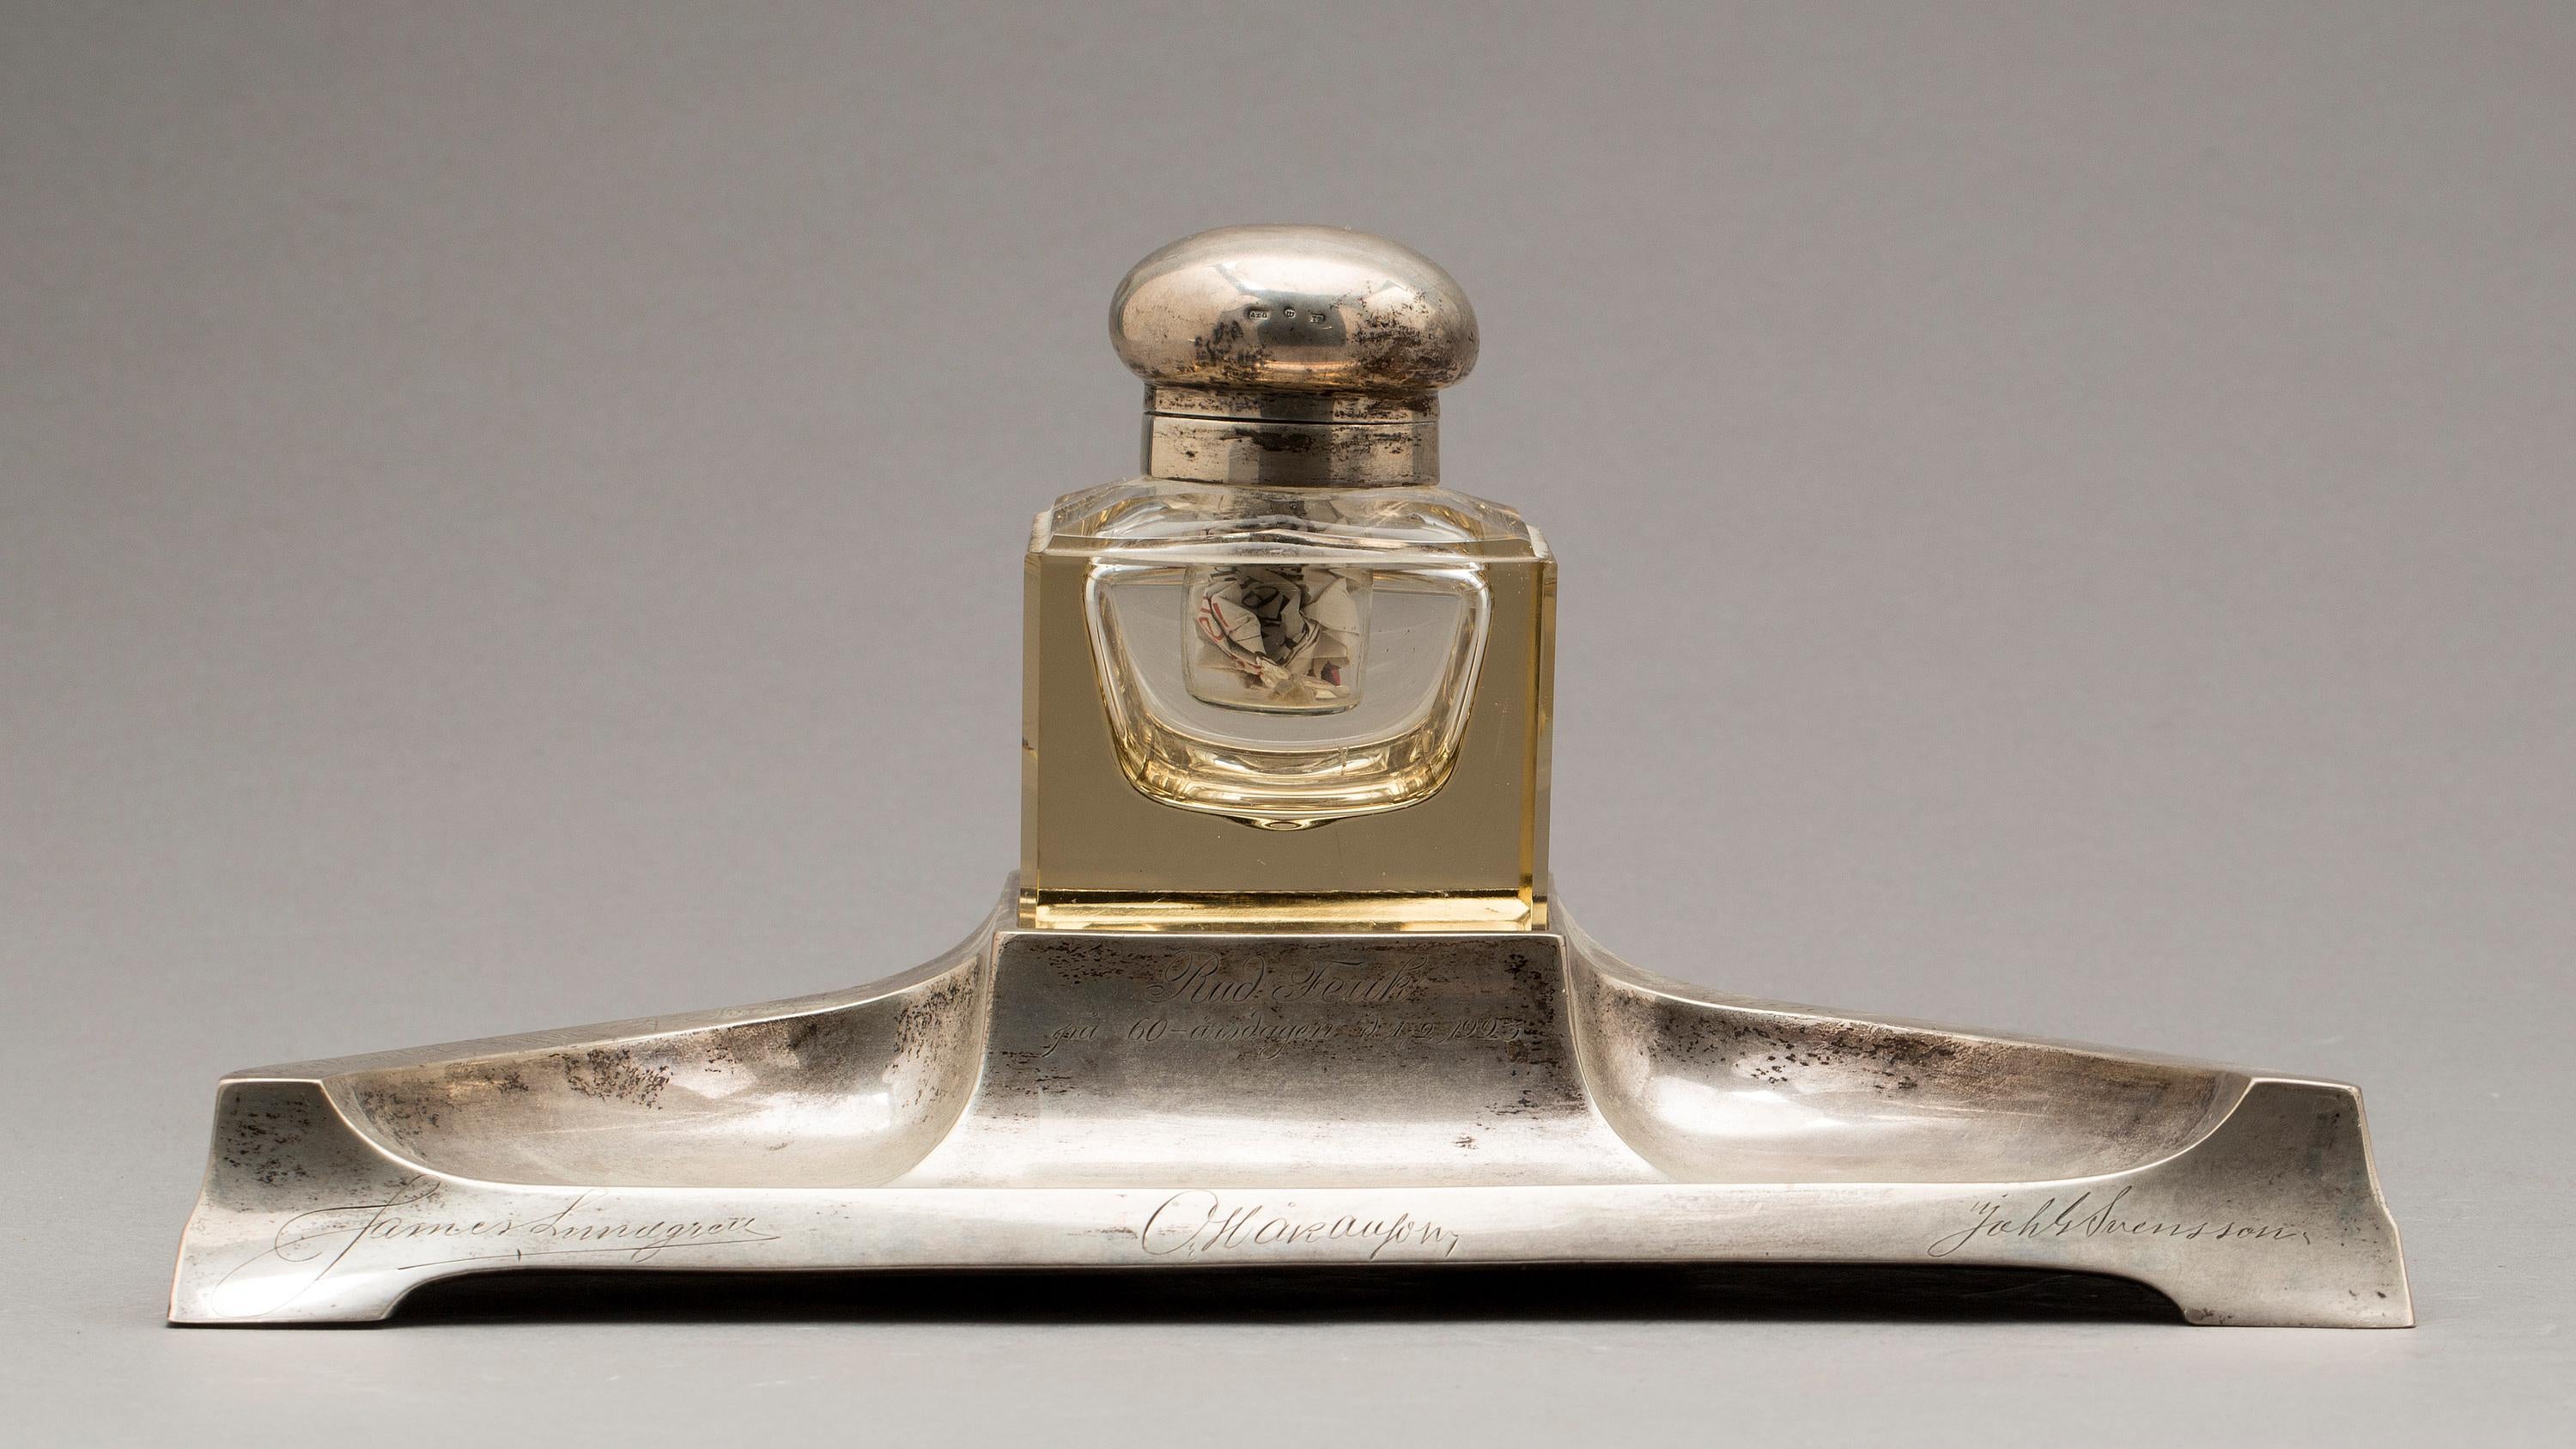 Sterling silver inkwell made in Denmark, 1920.
Very large size silver inkwell holder made of sterling silver, weight 620 grams.
Good condition, some engraving on the silver as seen on photos.